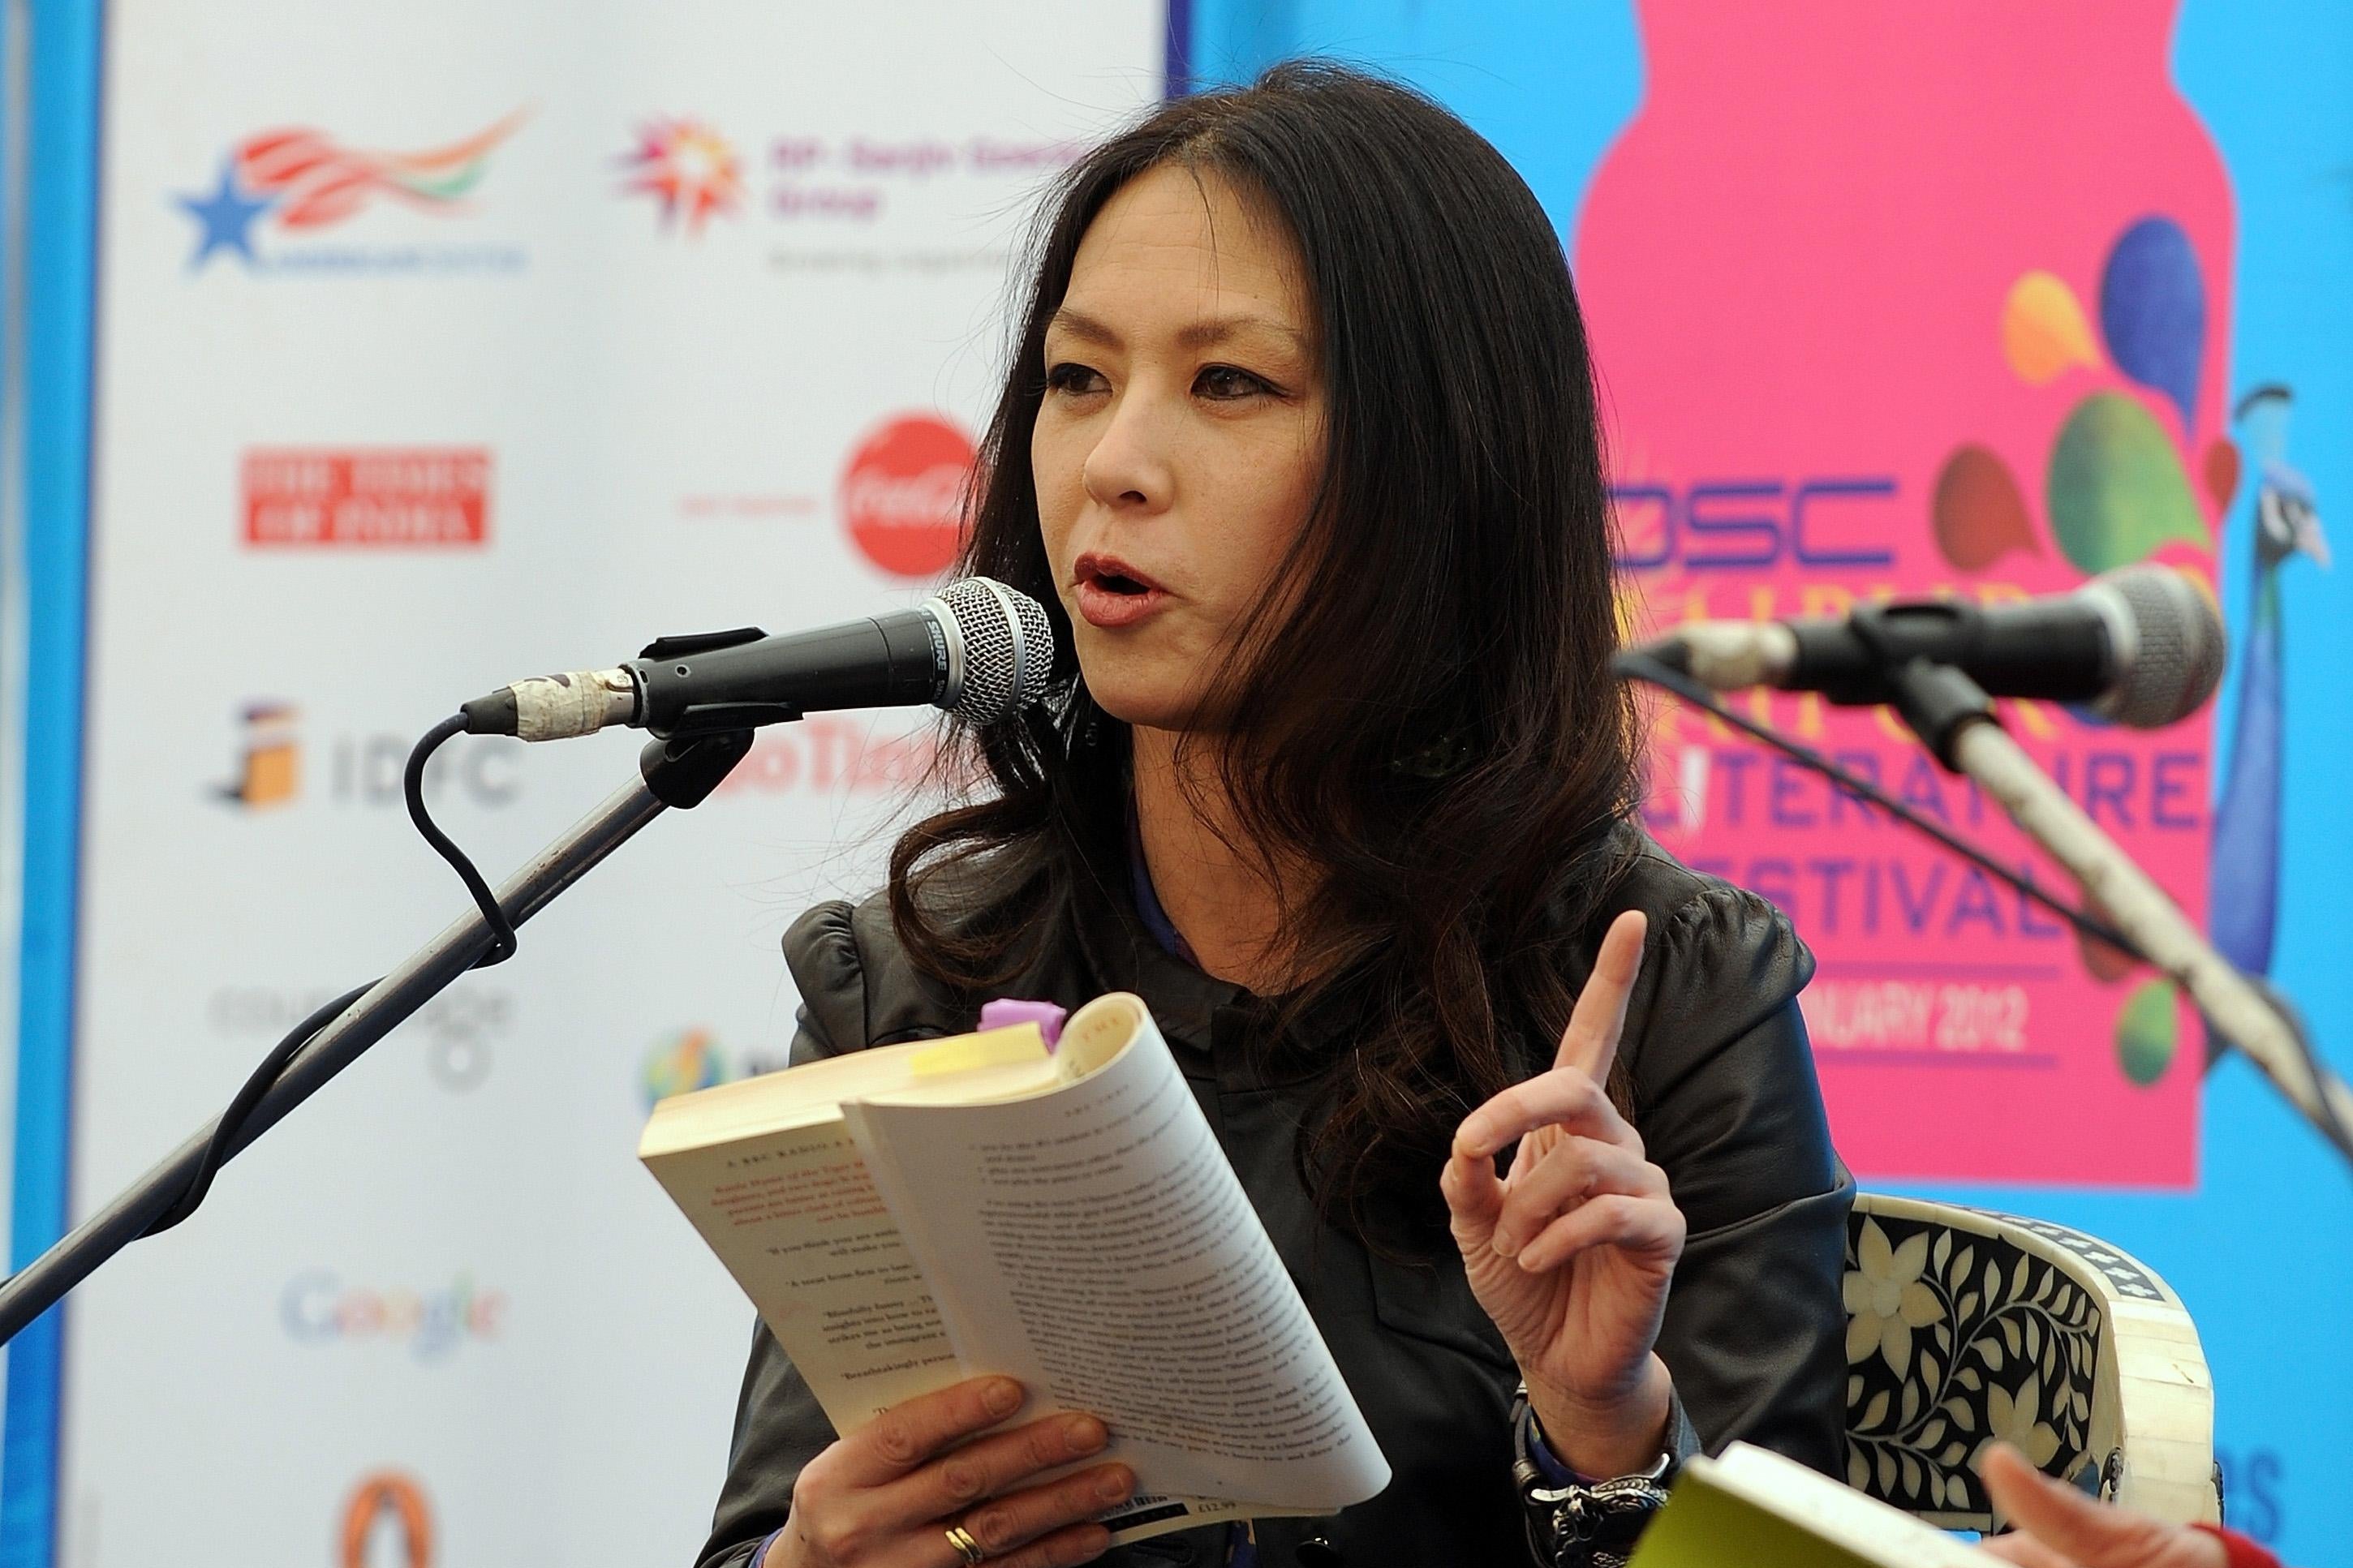 Amy Chua gestures as she reads an excerpt from her book during a book festival in Jaipur, India, on Jan. 21, 2012.